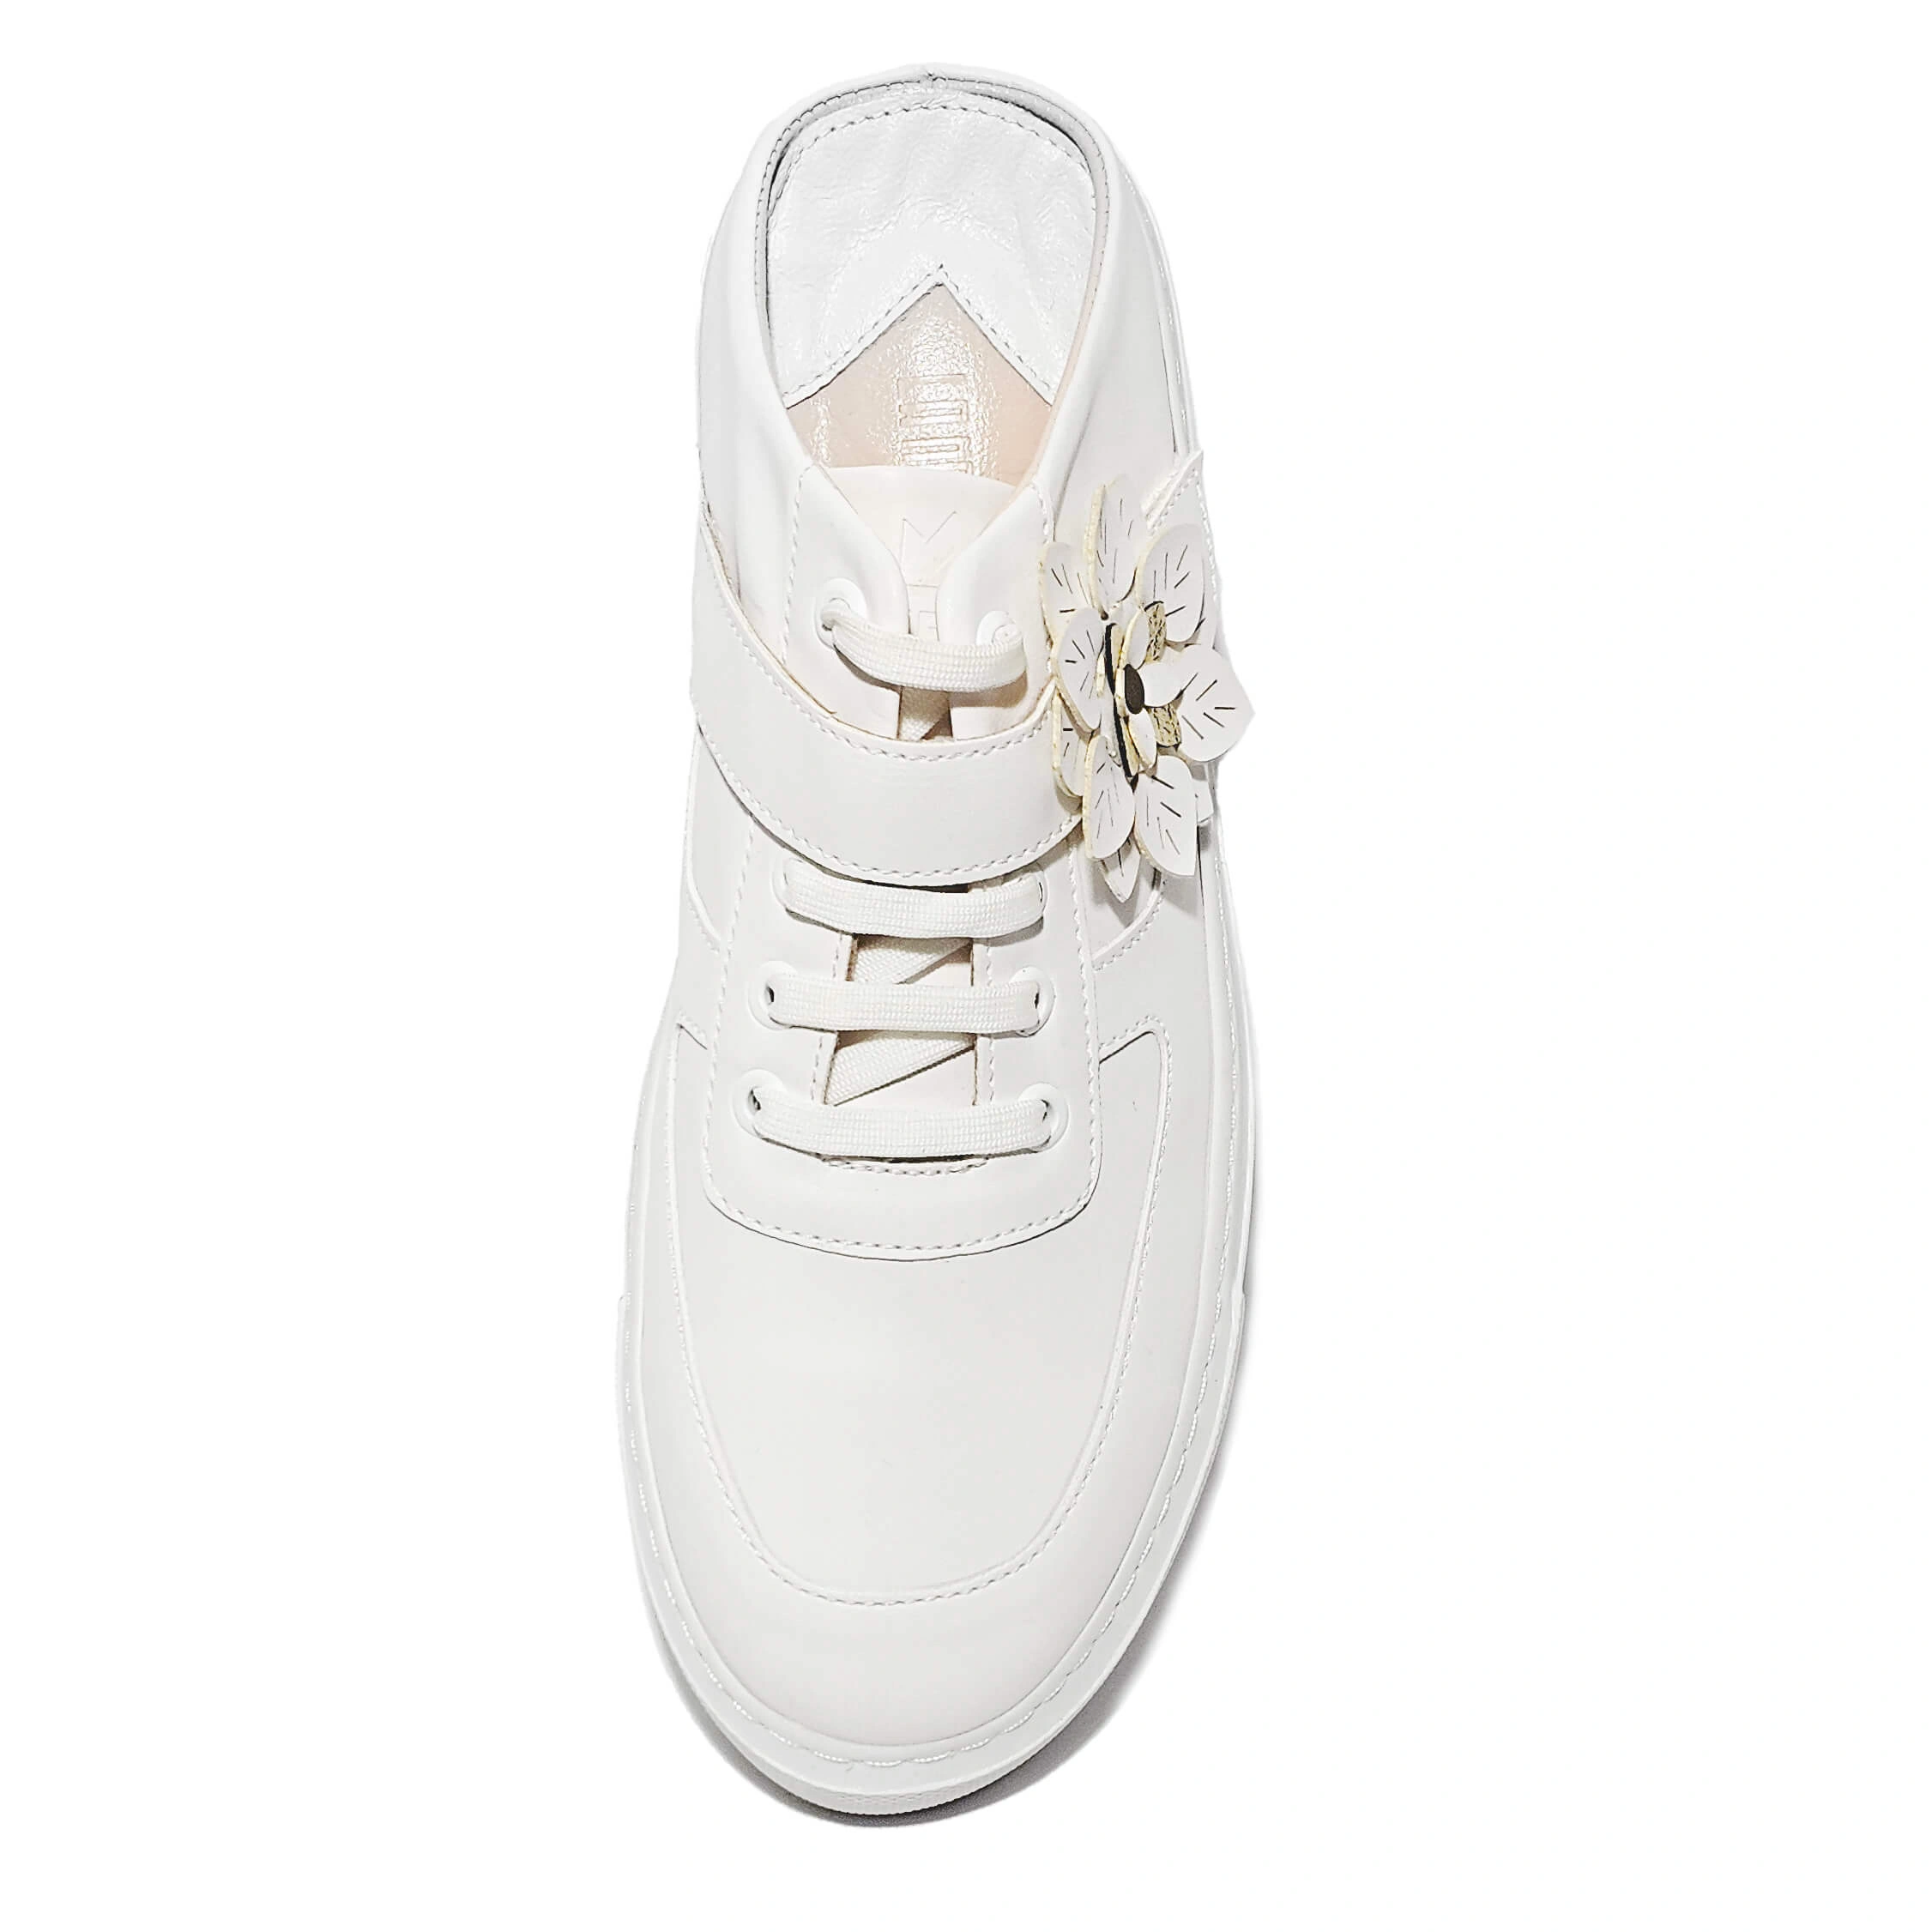 Sneakers-Sandale Blanche image